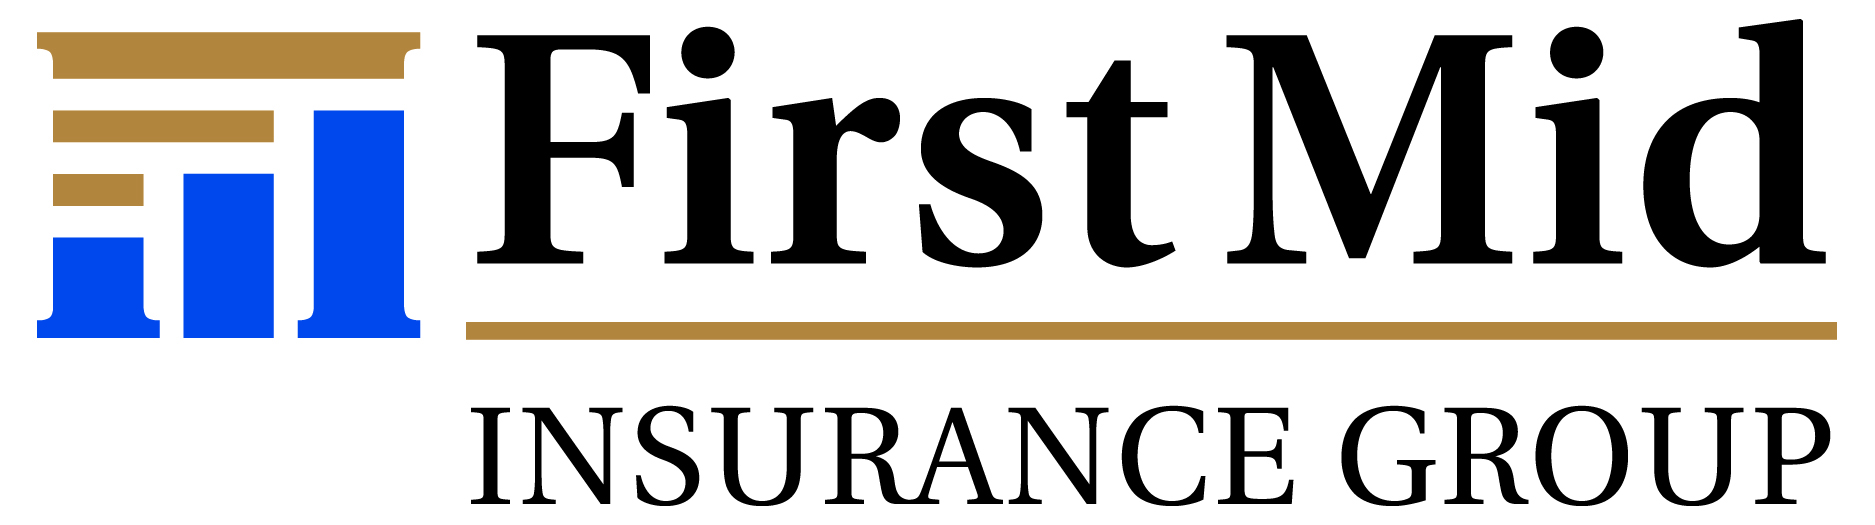 First Mid Insurance Group